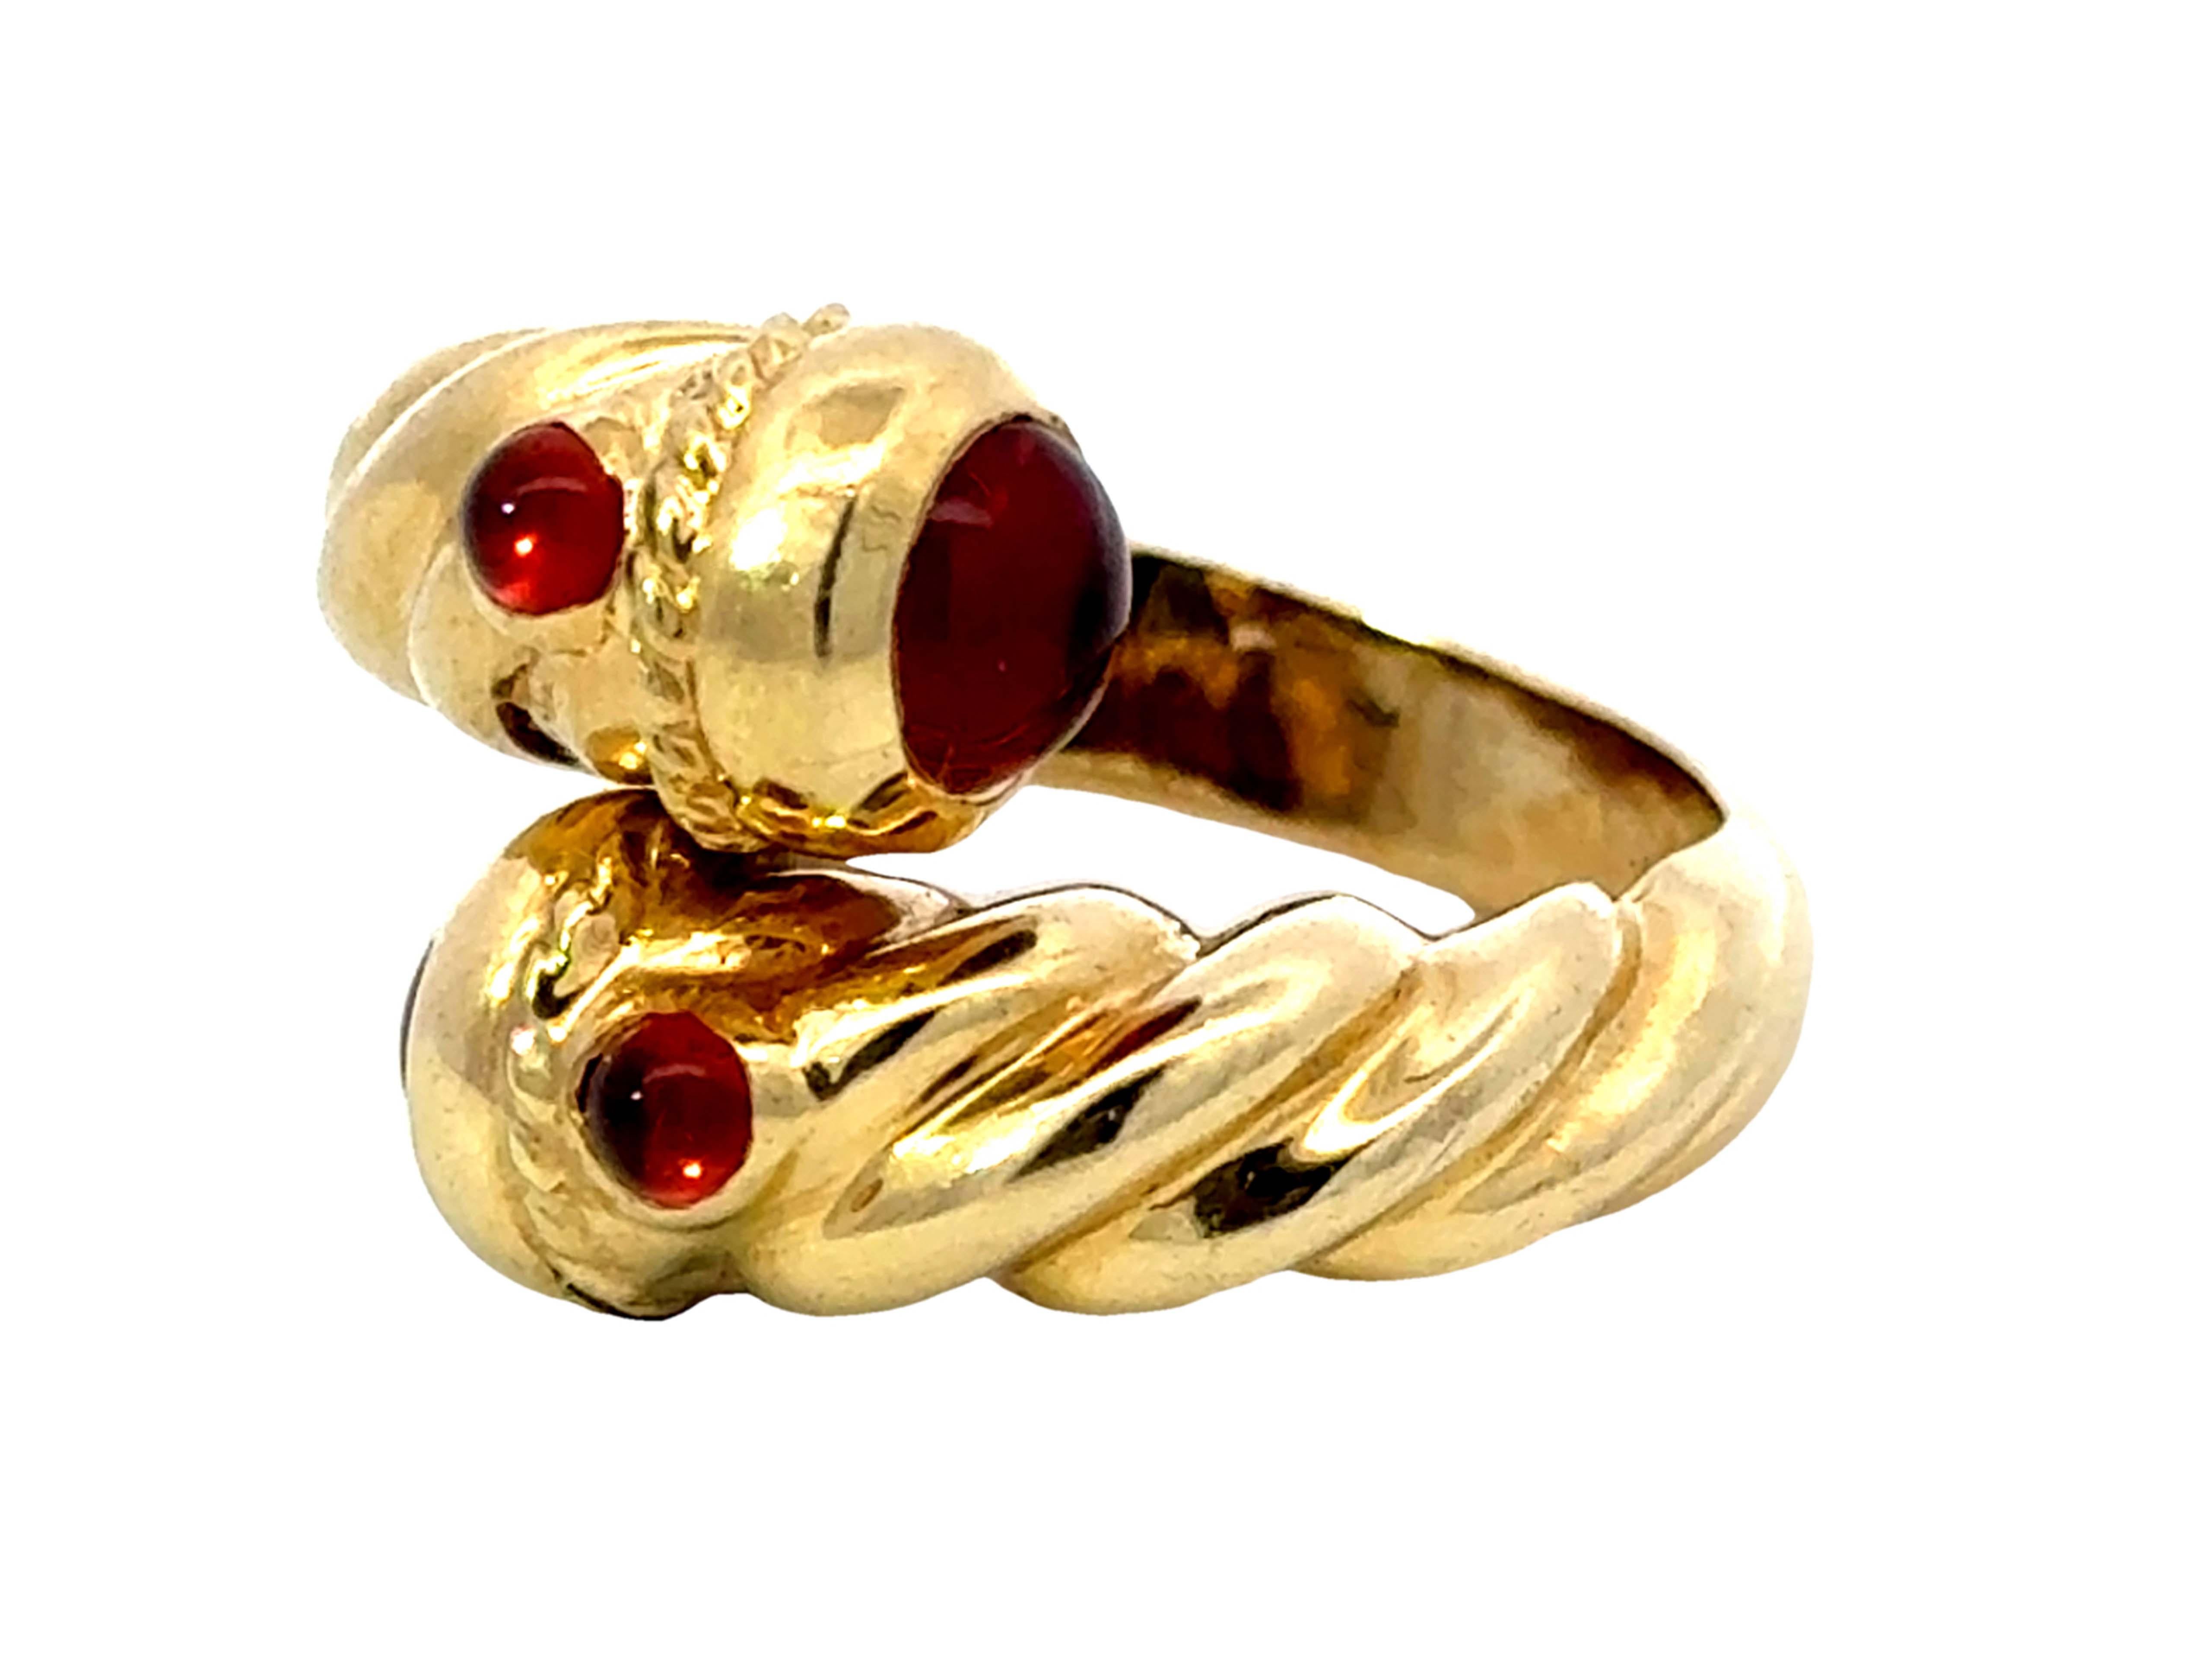 Orange Cabochon Garnet Wraparound Ring 14k Yellow Gold In Excellent Condition For Sale In Honolulu, HI